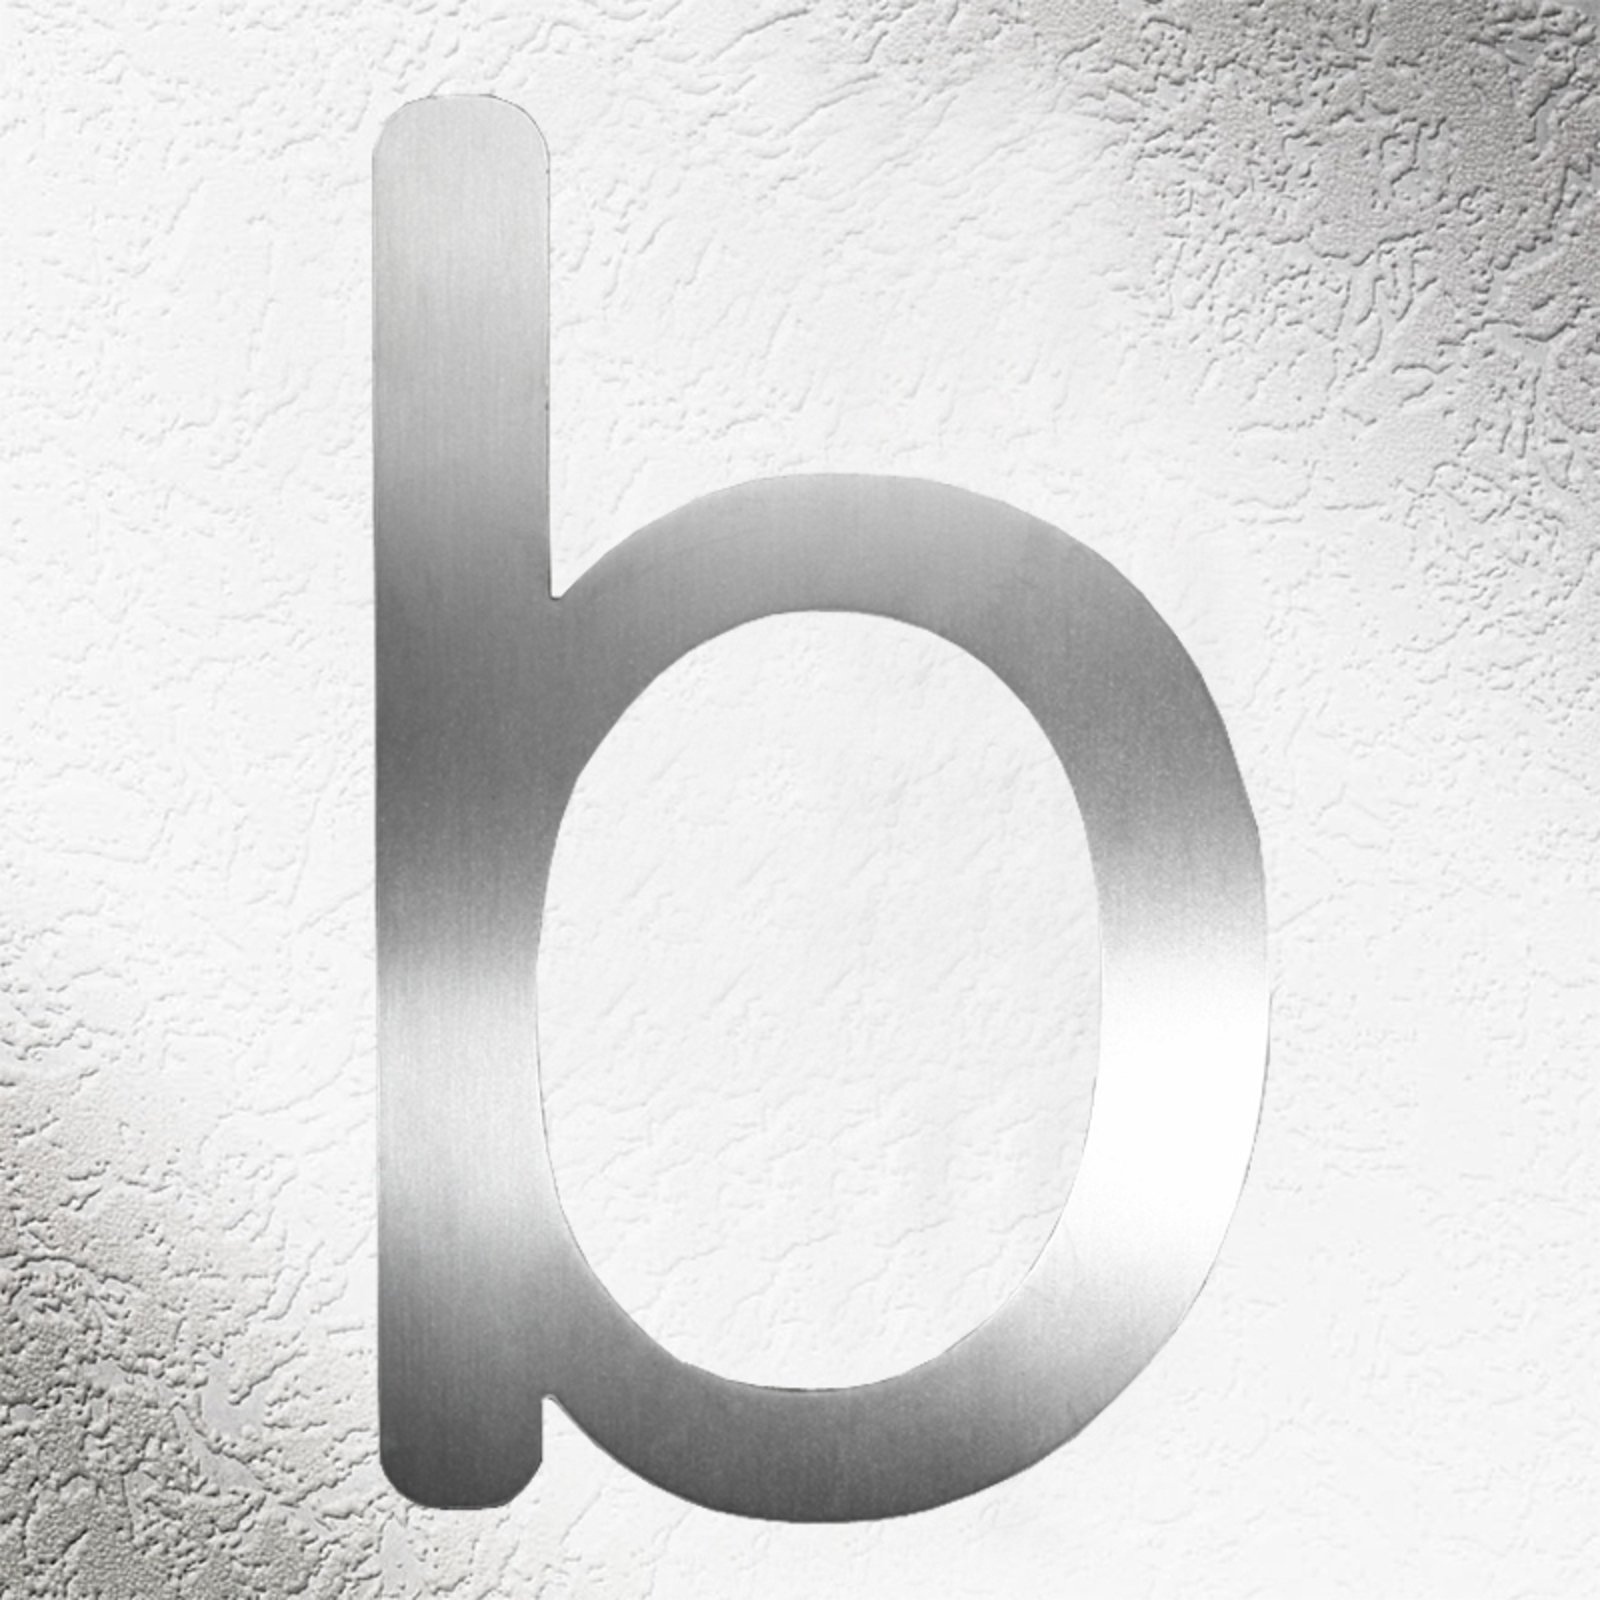 High Quality House Numbers - Letter b